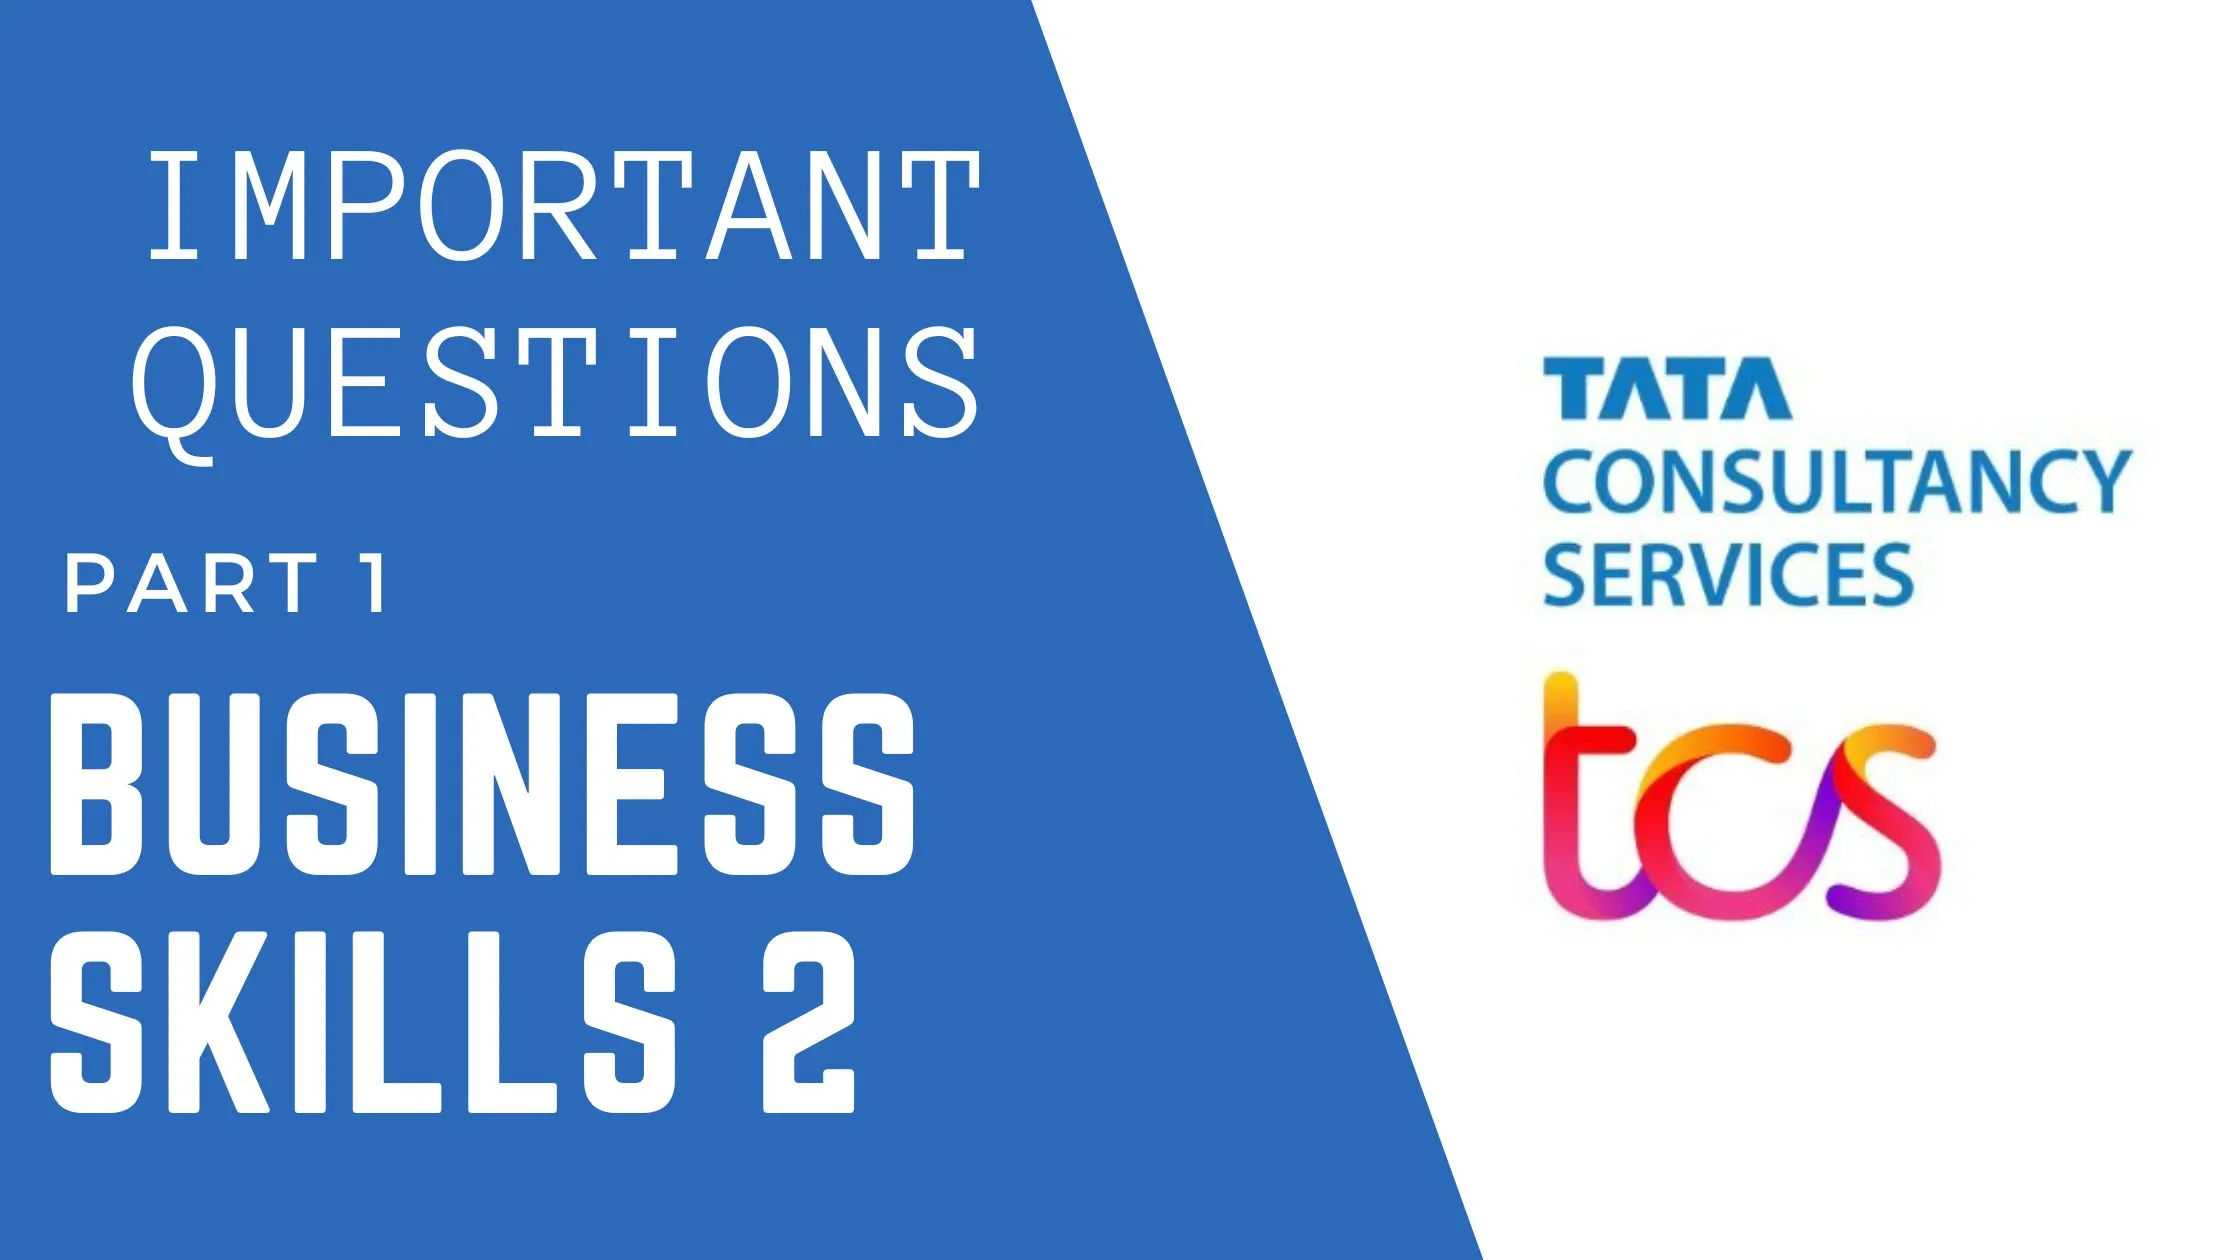 TCS Wings1 Business skills track 2 IMP Questions and answers - Part 1